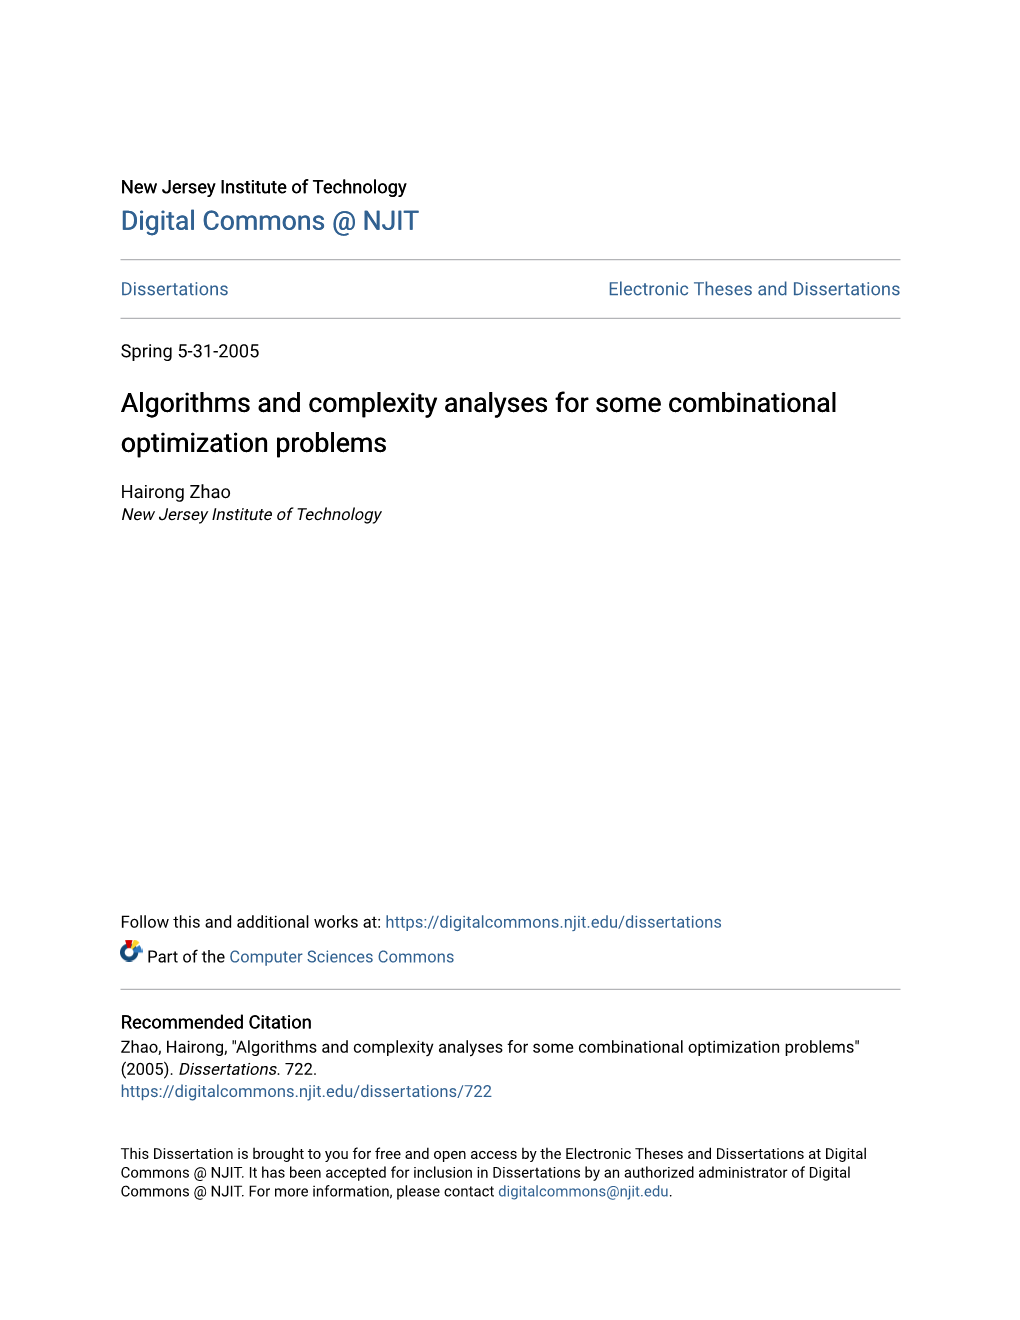 Algorithms and Complexity Analyses for Some Combinational Optimization Problems